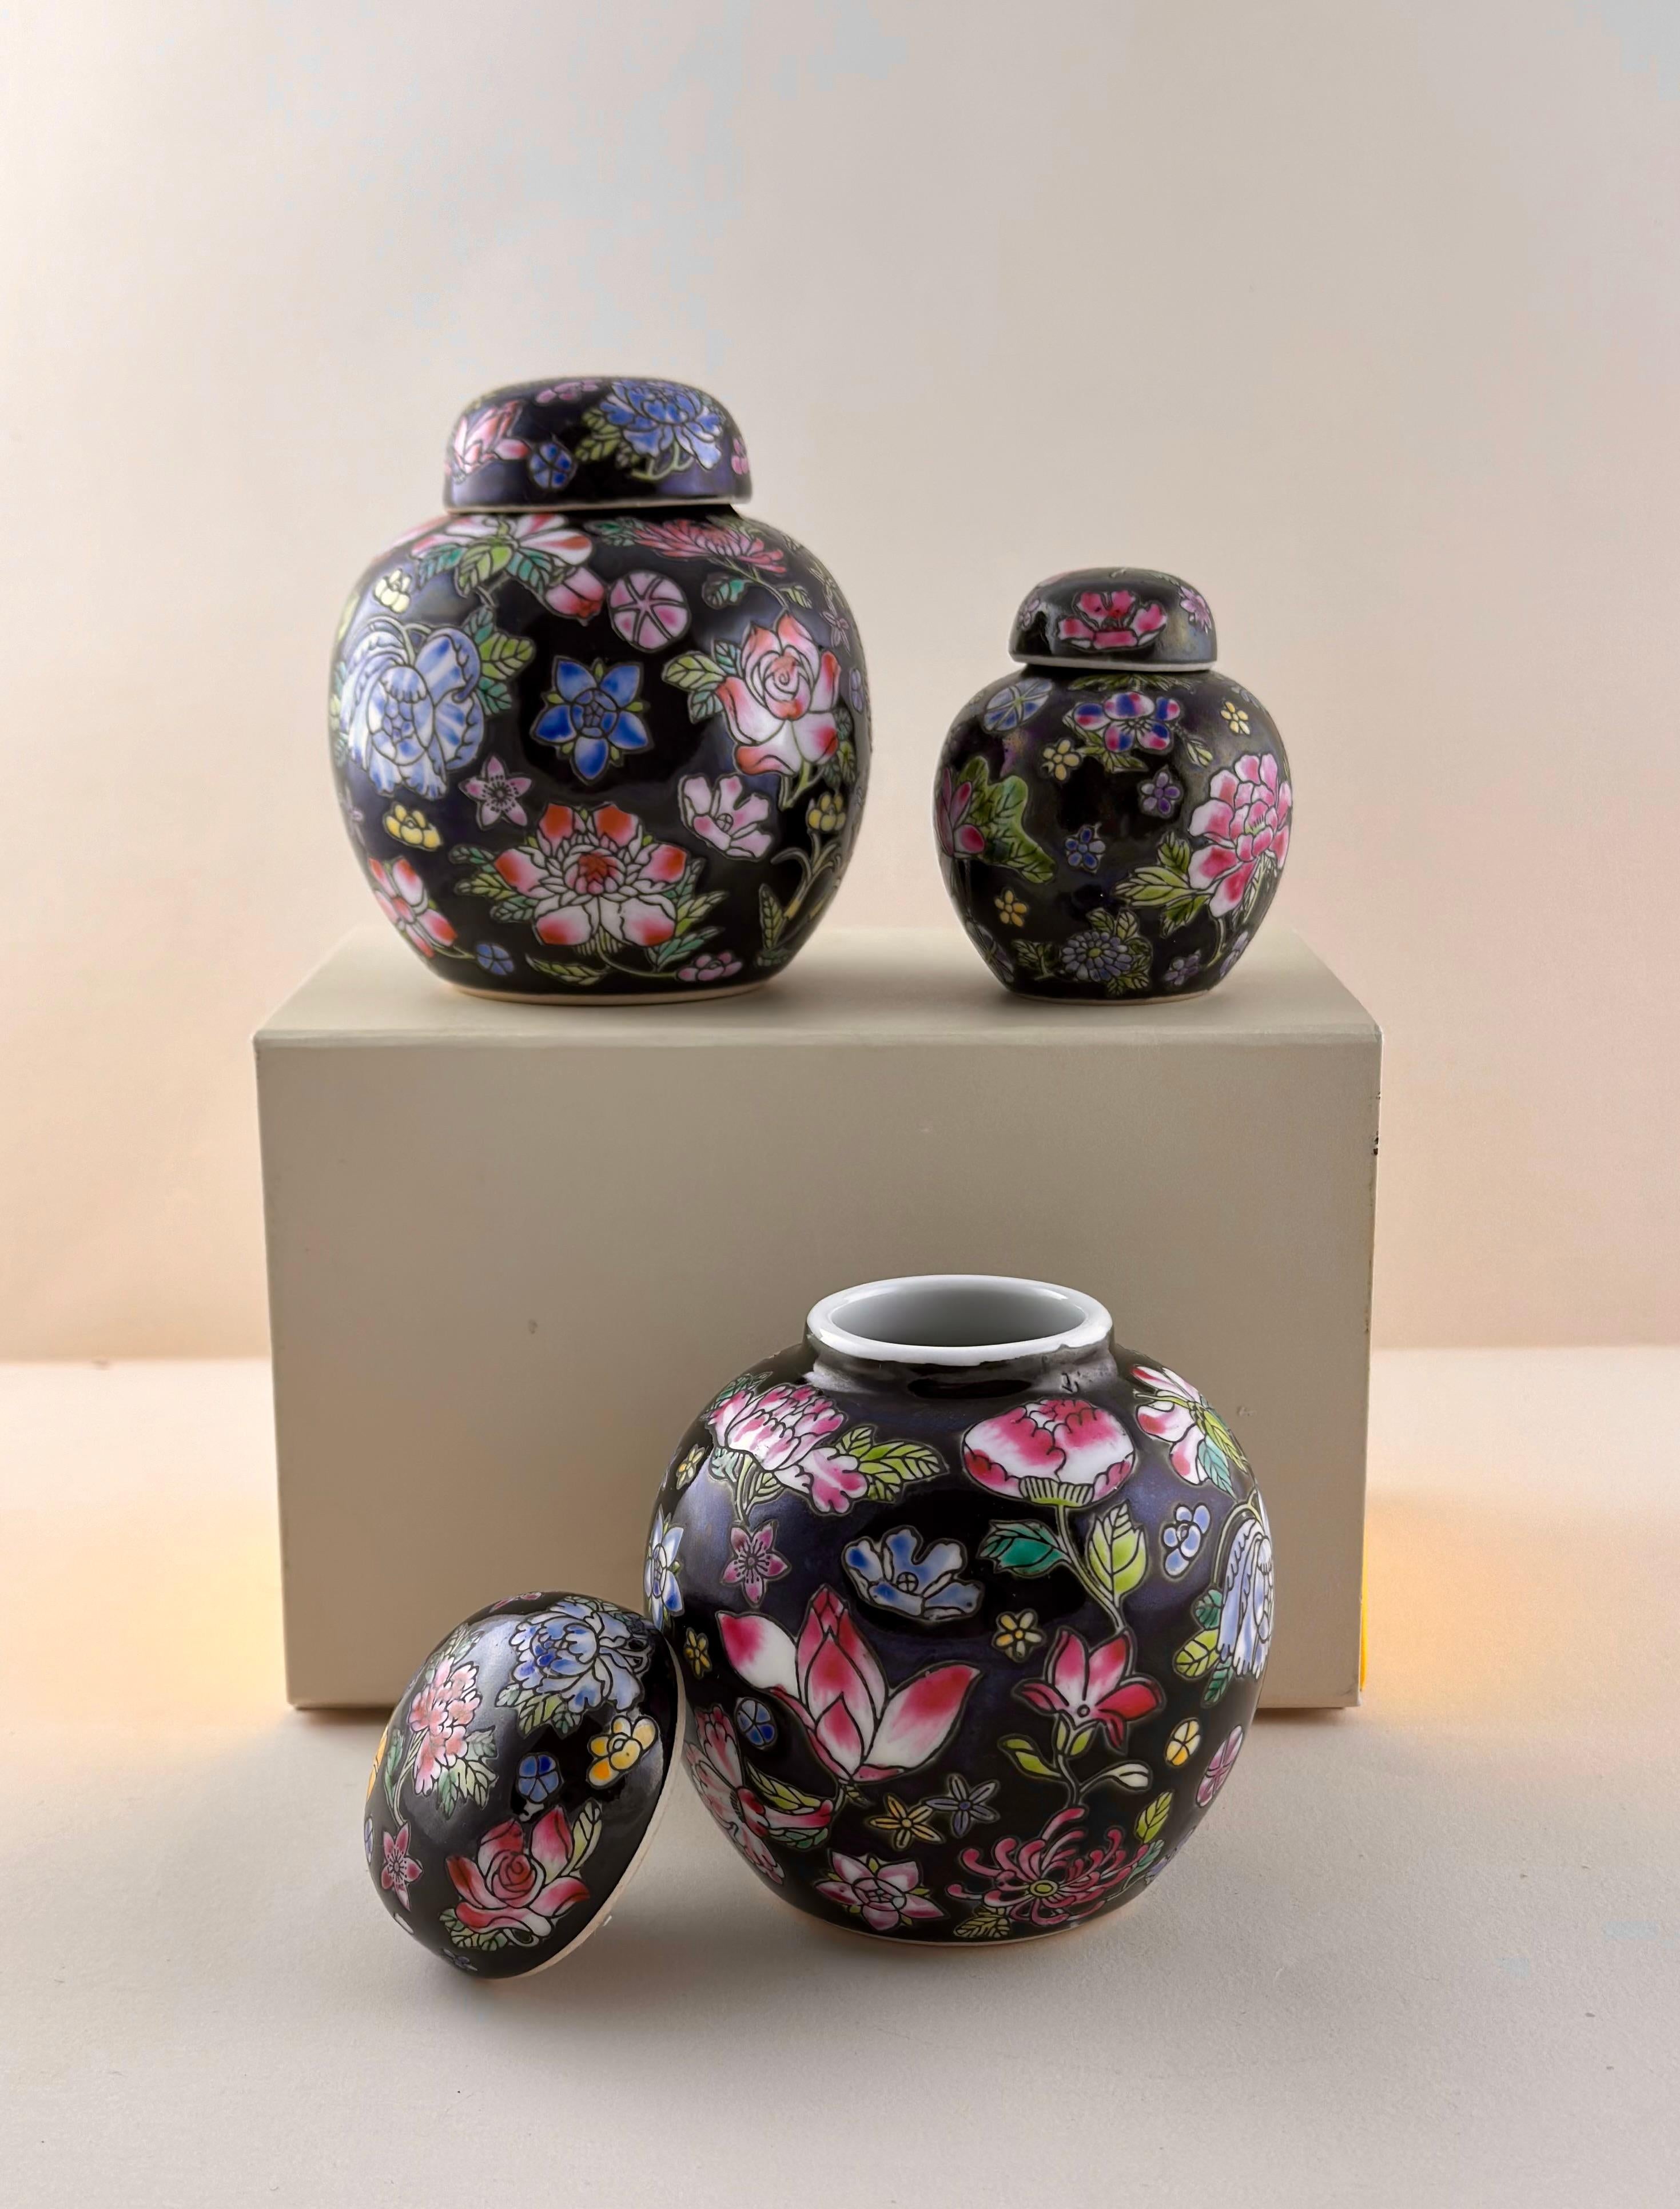 Vintage Chinese Jingdezhen Porcelain  'Famille Noire' Ginger Jars - Set of 3  In Good Condition For Sale In Glasgow, GB